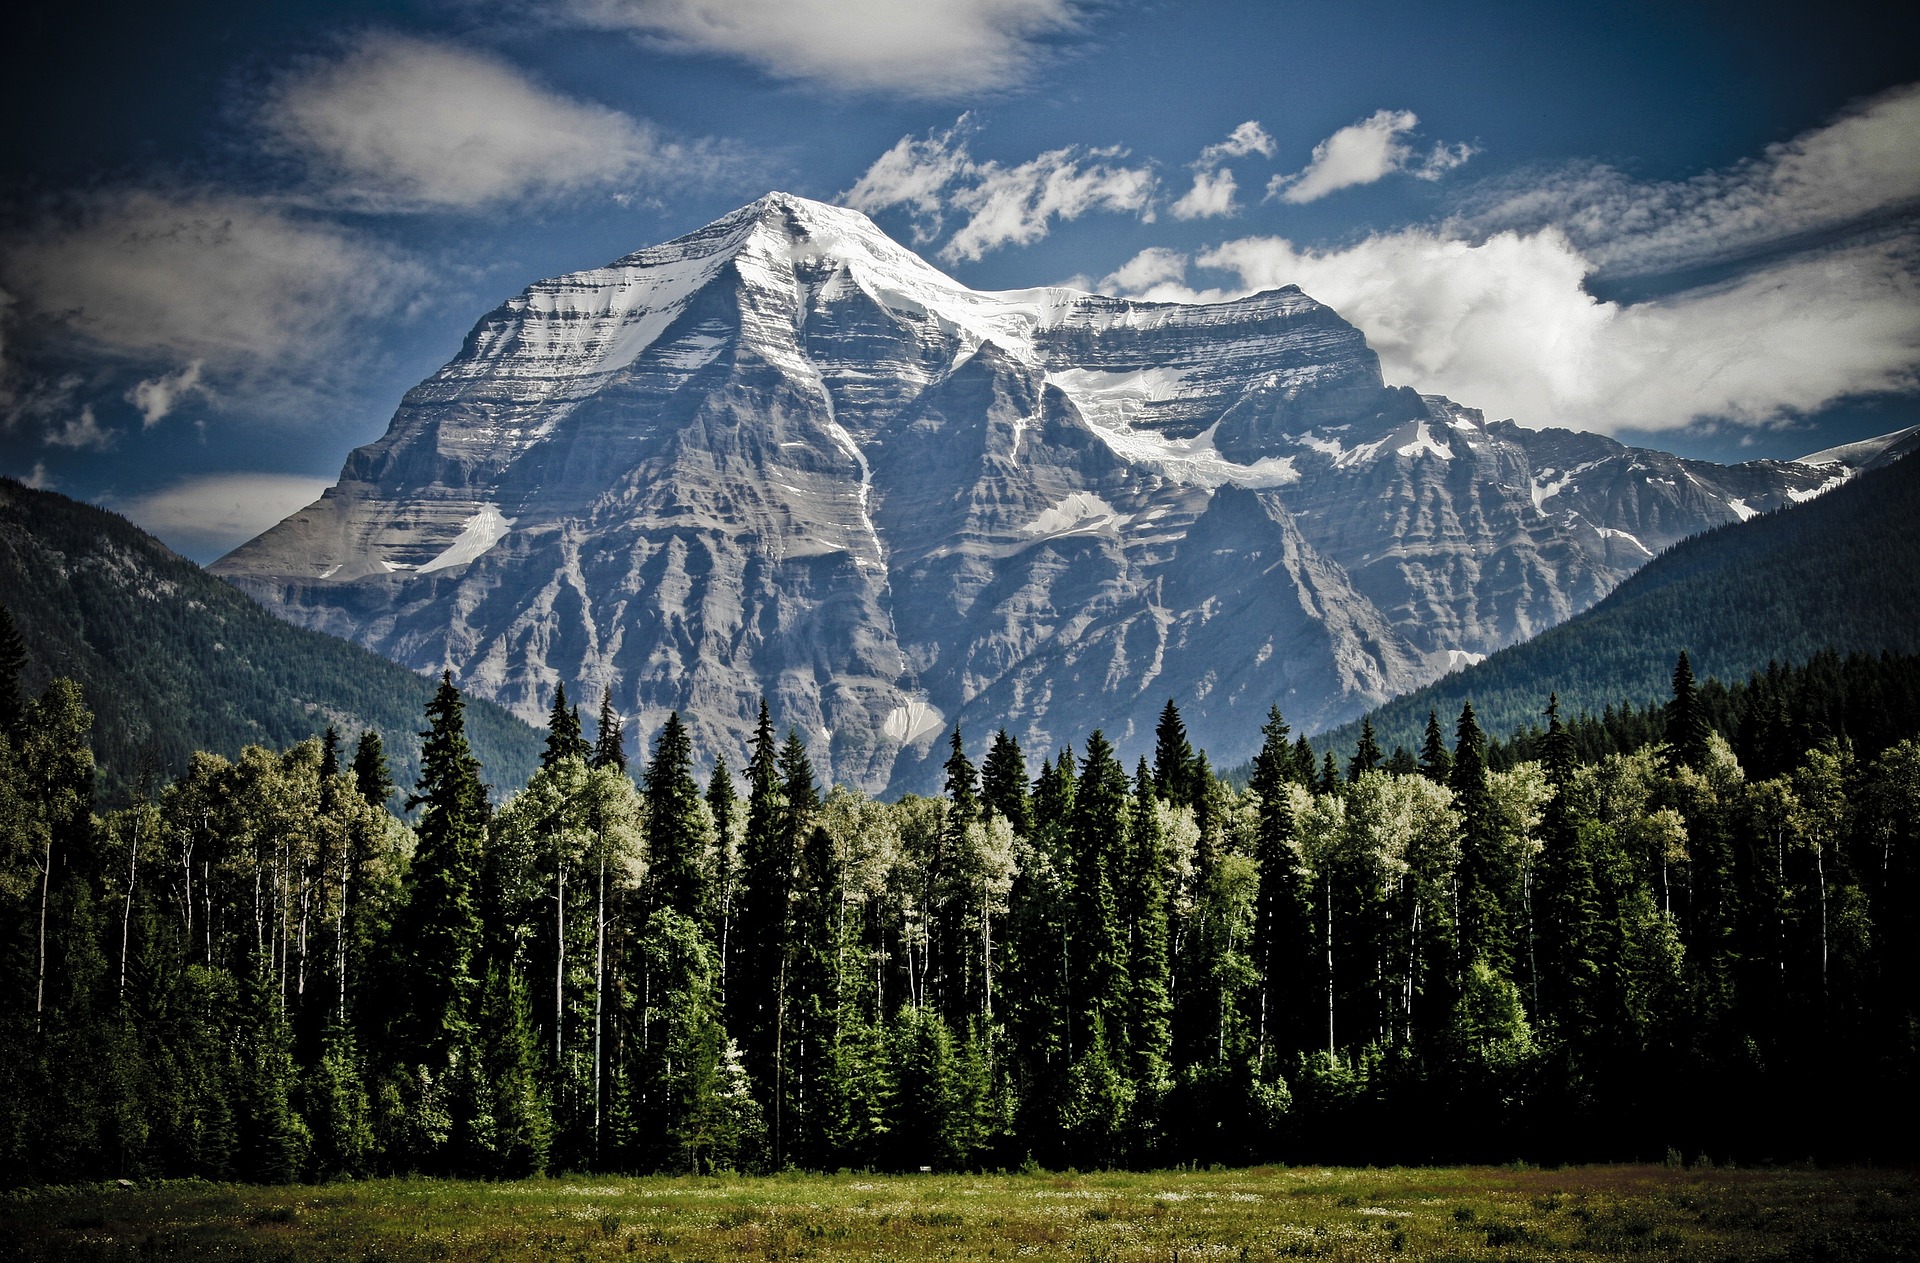 Mountains with Evergreen Trees: You're Stronger Than You Think